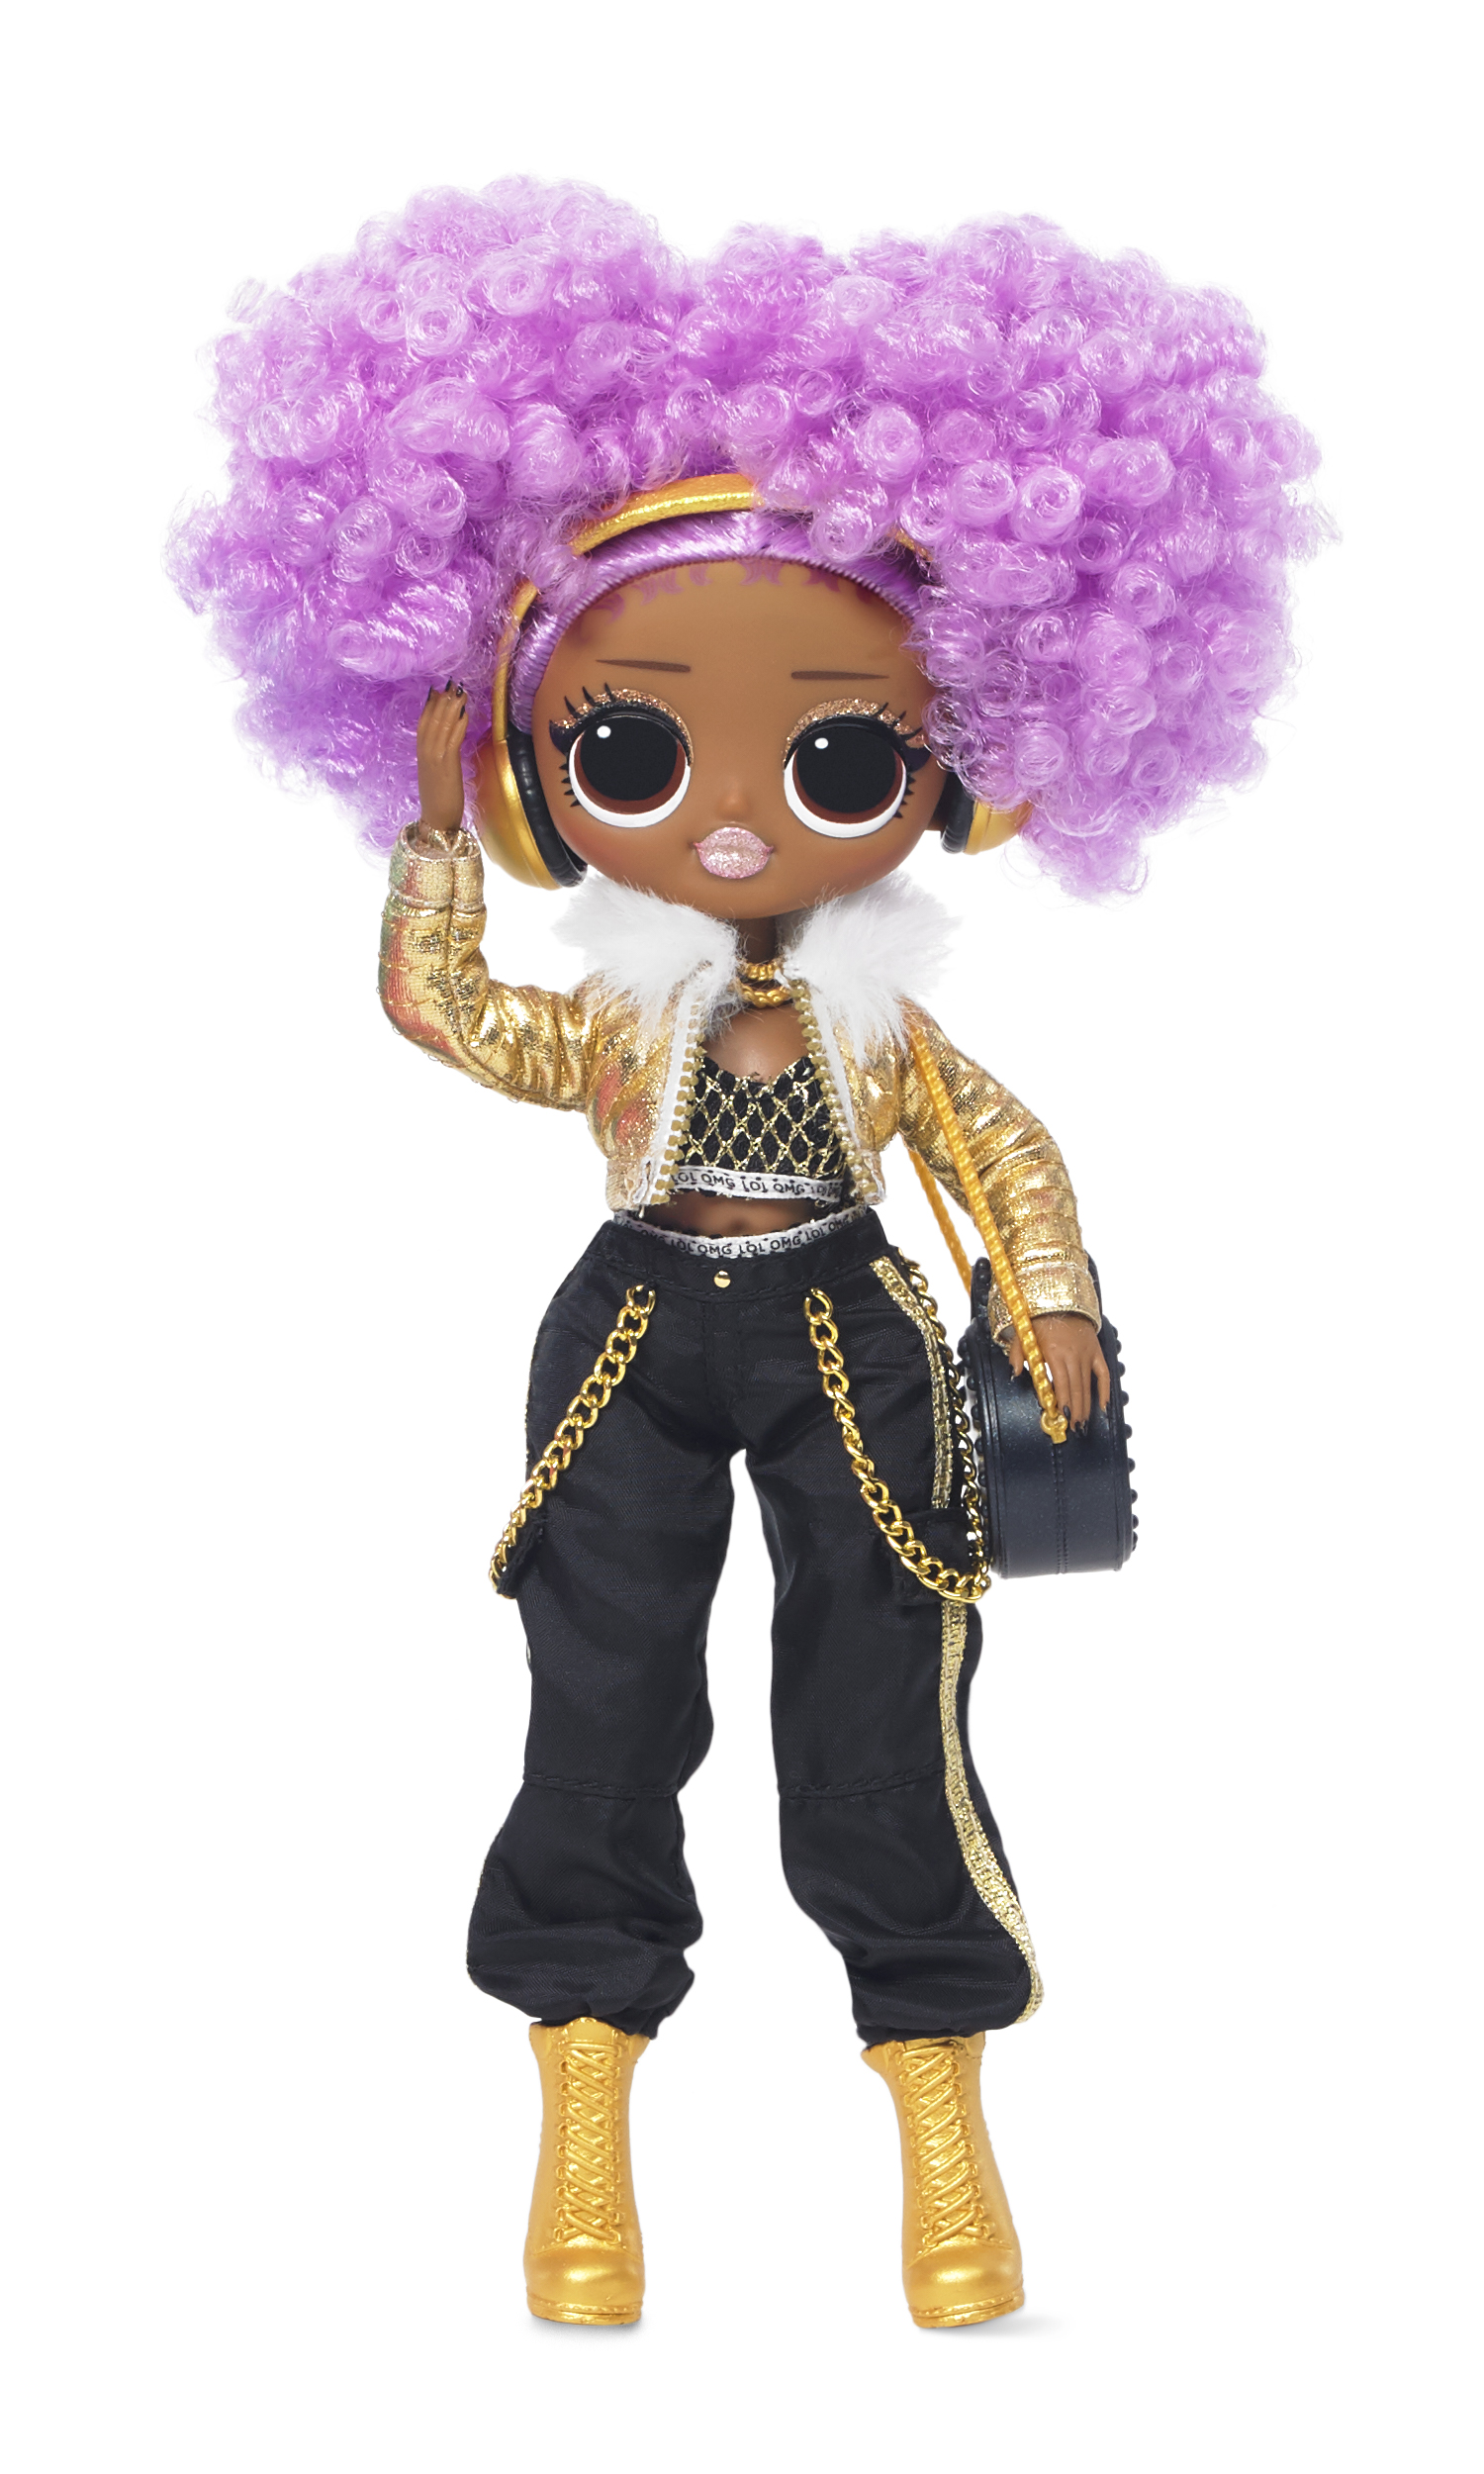 LOL Surprise Omg 24K D.J. Fashion Doll Playset, 20 Pieces, Great Gift for Kids Ages 4 5 6+ - image 1 of 3